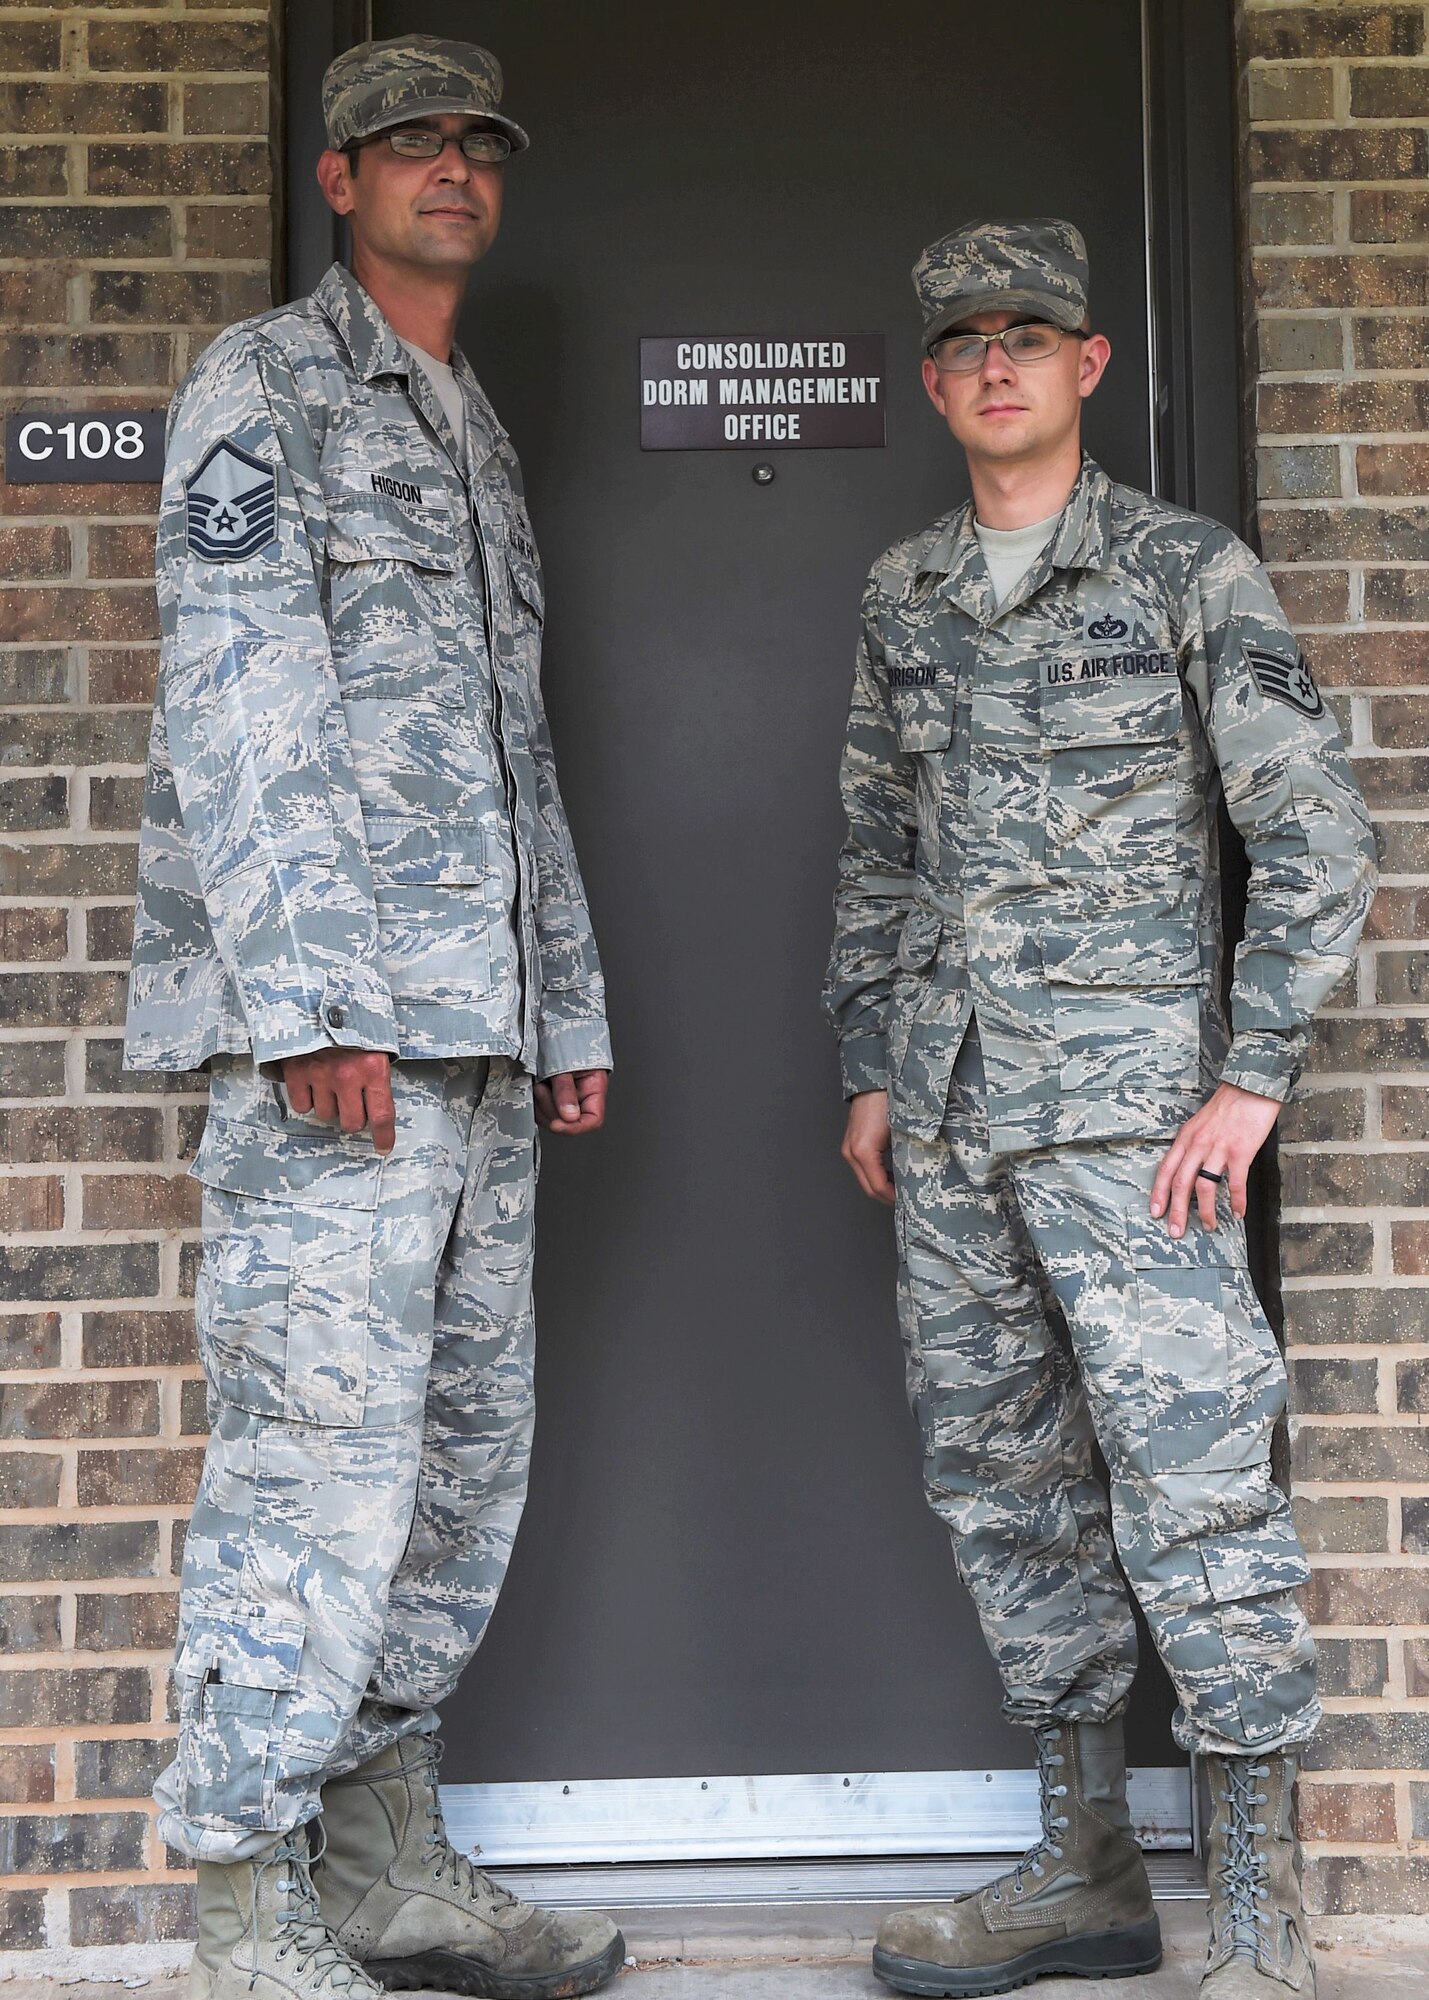 U.S. Air Force Master Sgt. Christopher Higdon and U.S. Air Force Staff Sgt. William Harrison, 97th CES Airmen dorm leaders, pose for a photo in front of the dorm managers office, June 30, 2017, at Altus Air Force Base, Oklahoma. Dorm management works to improve dorm quality of life for the first-term Airmen living on base by preforming multiple tasks to maintain the longevity of the Altus AFB dorms. (U.S. Air Force Photo by Airman 1st Class Jackson N. Haddon/Released).